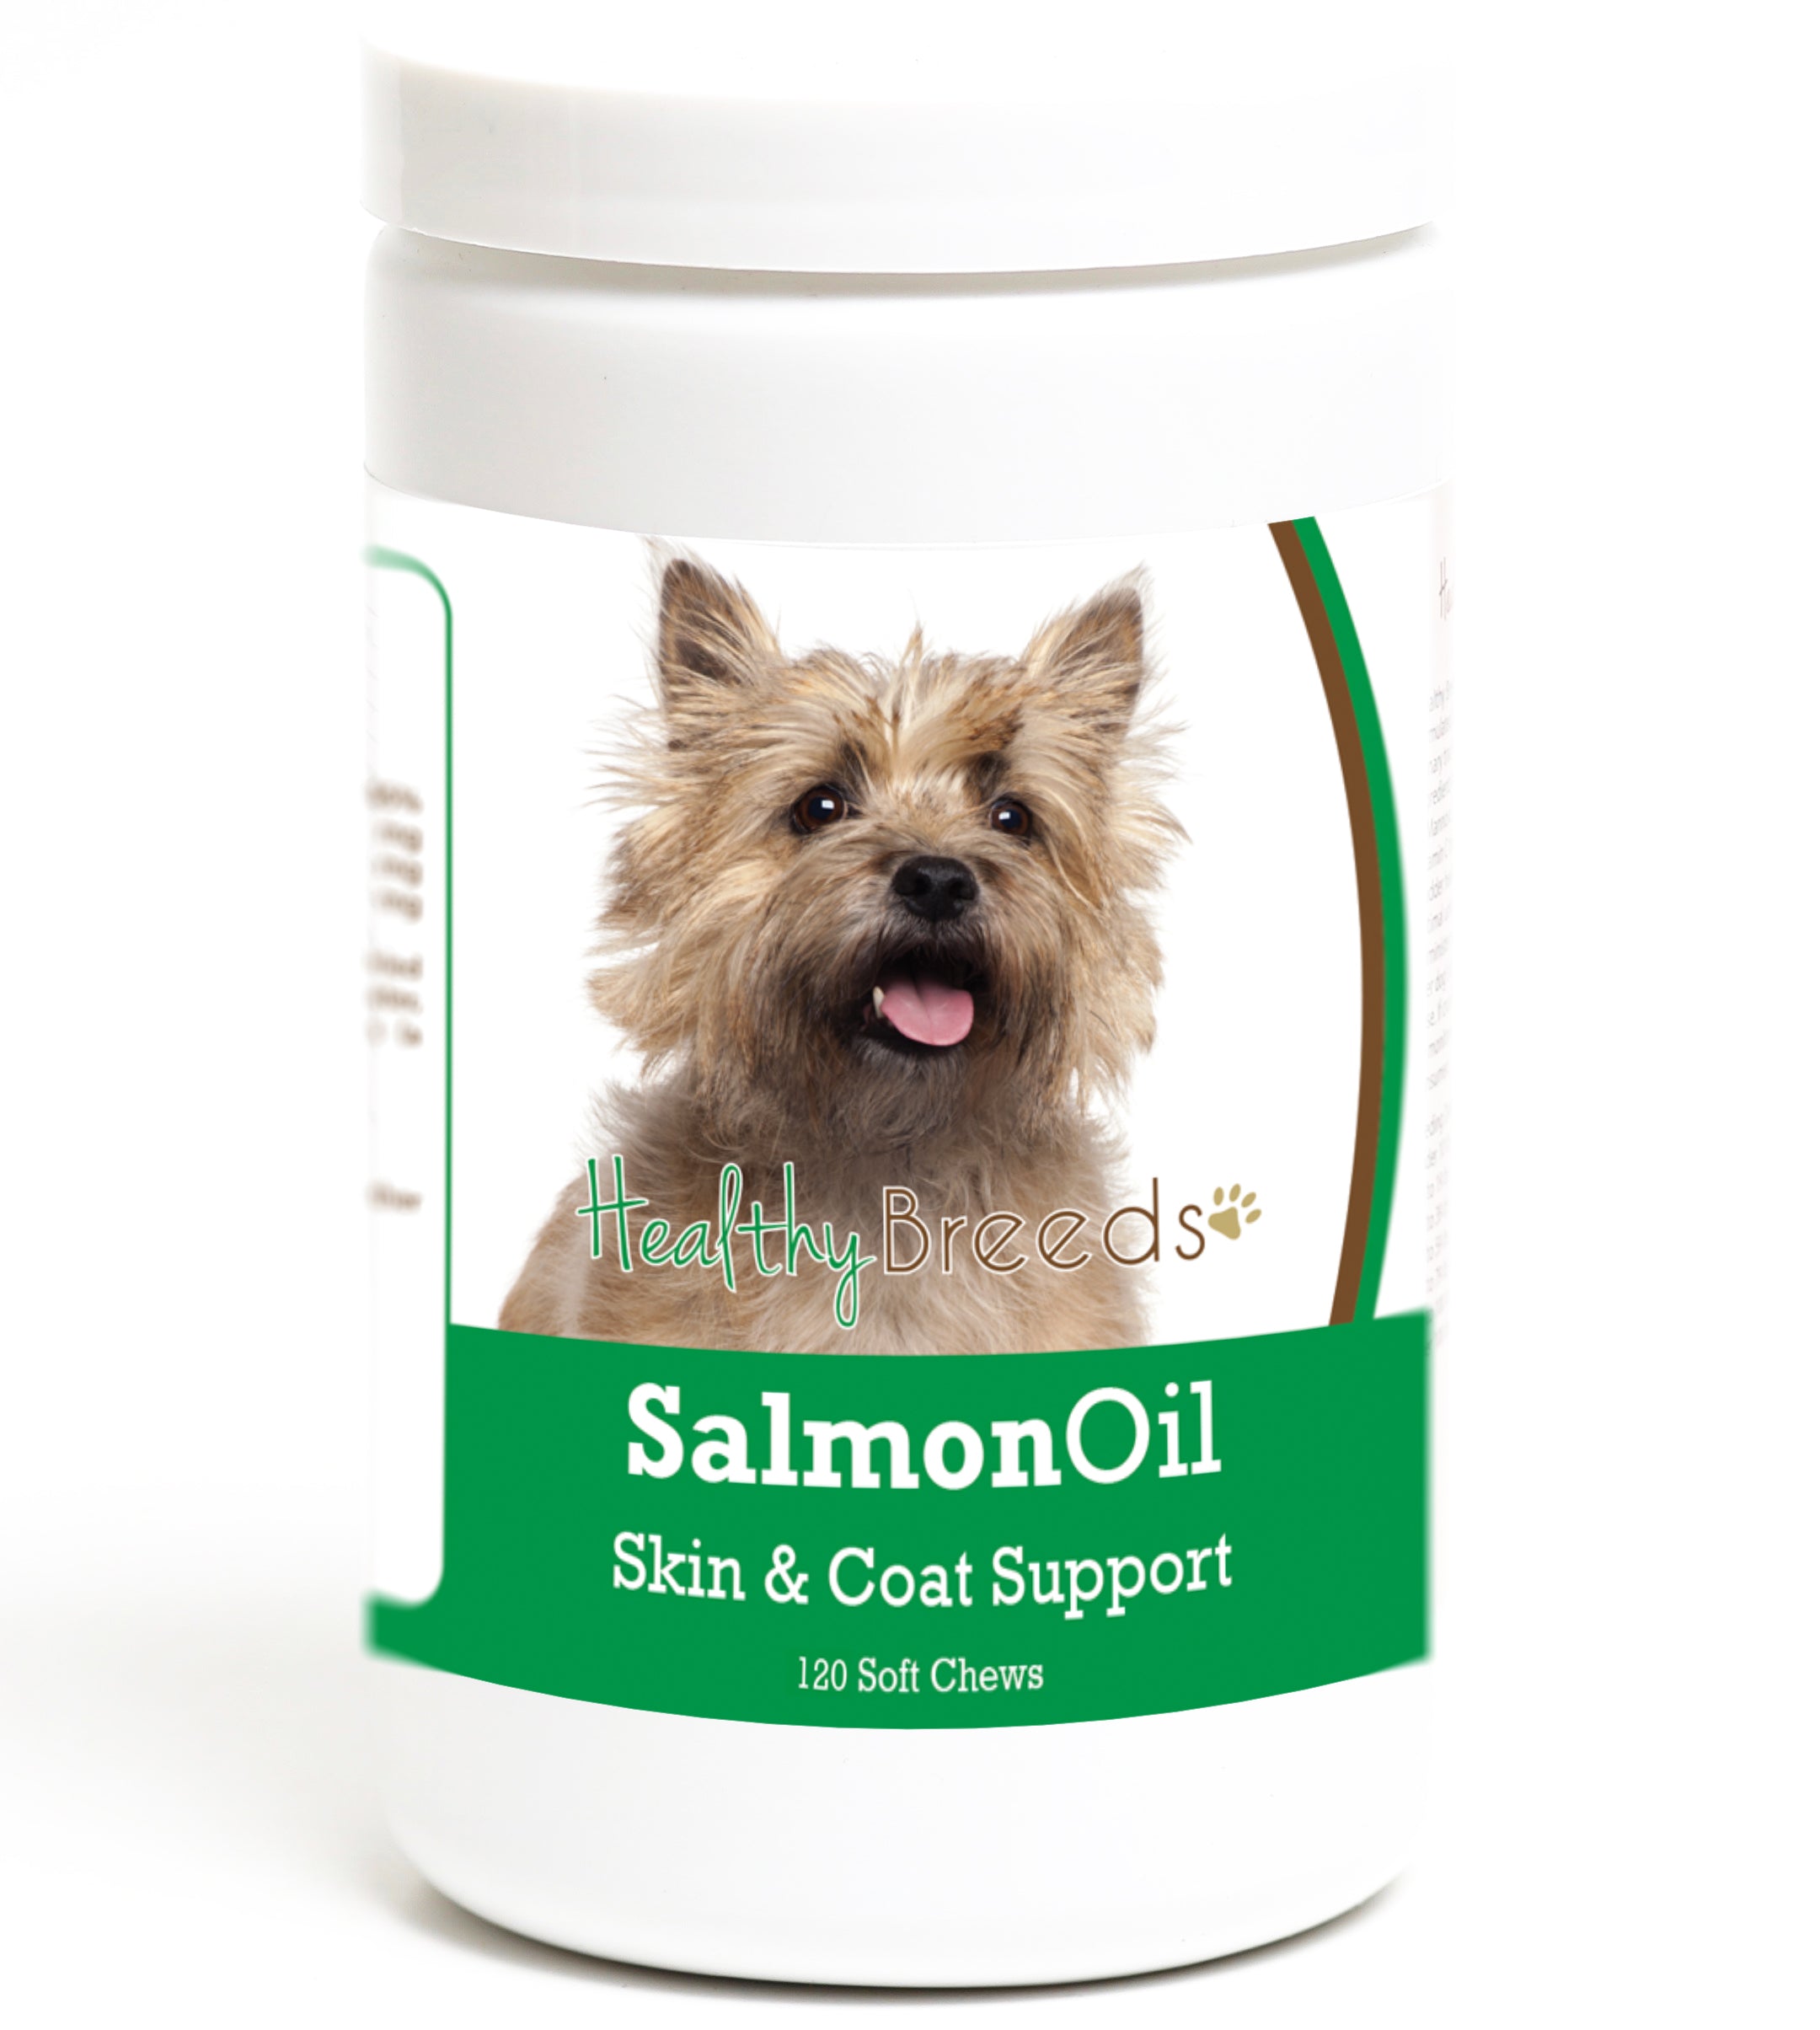 Cairn Terrier Salmon Oil Soft Chews 120 Count